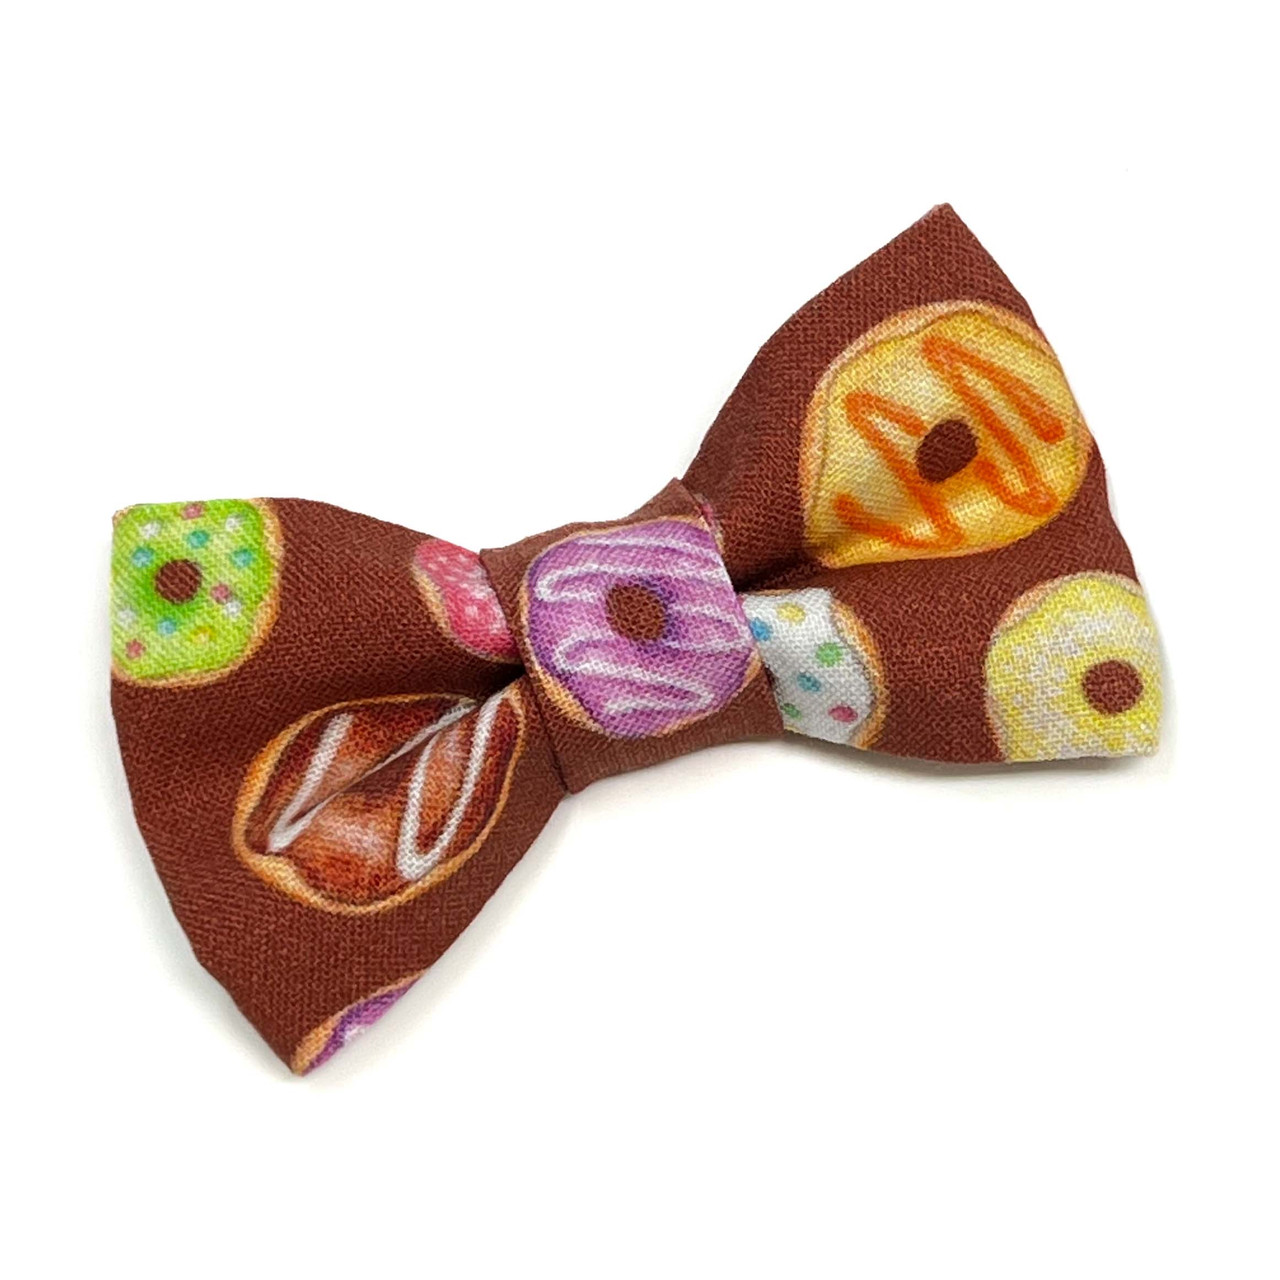 Cat Collar and Bow Tie - Doughnuts and Sprinkles